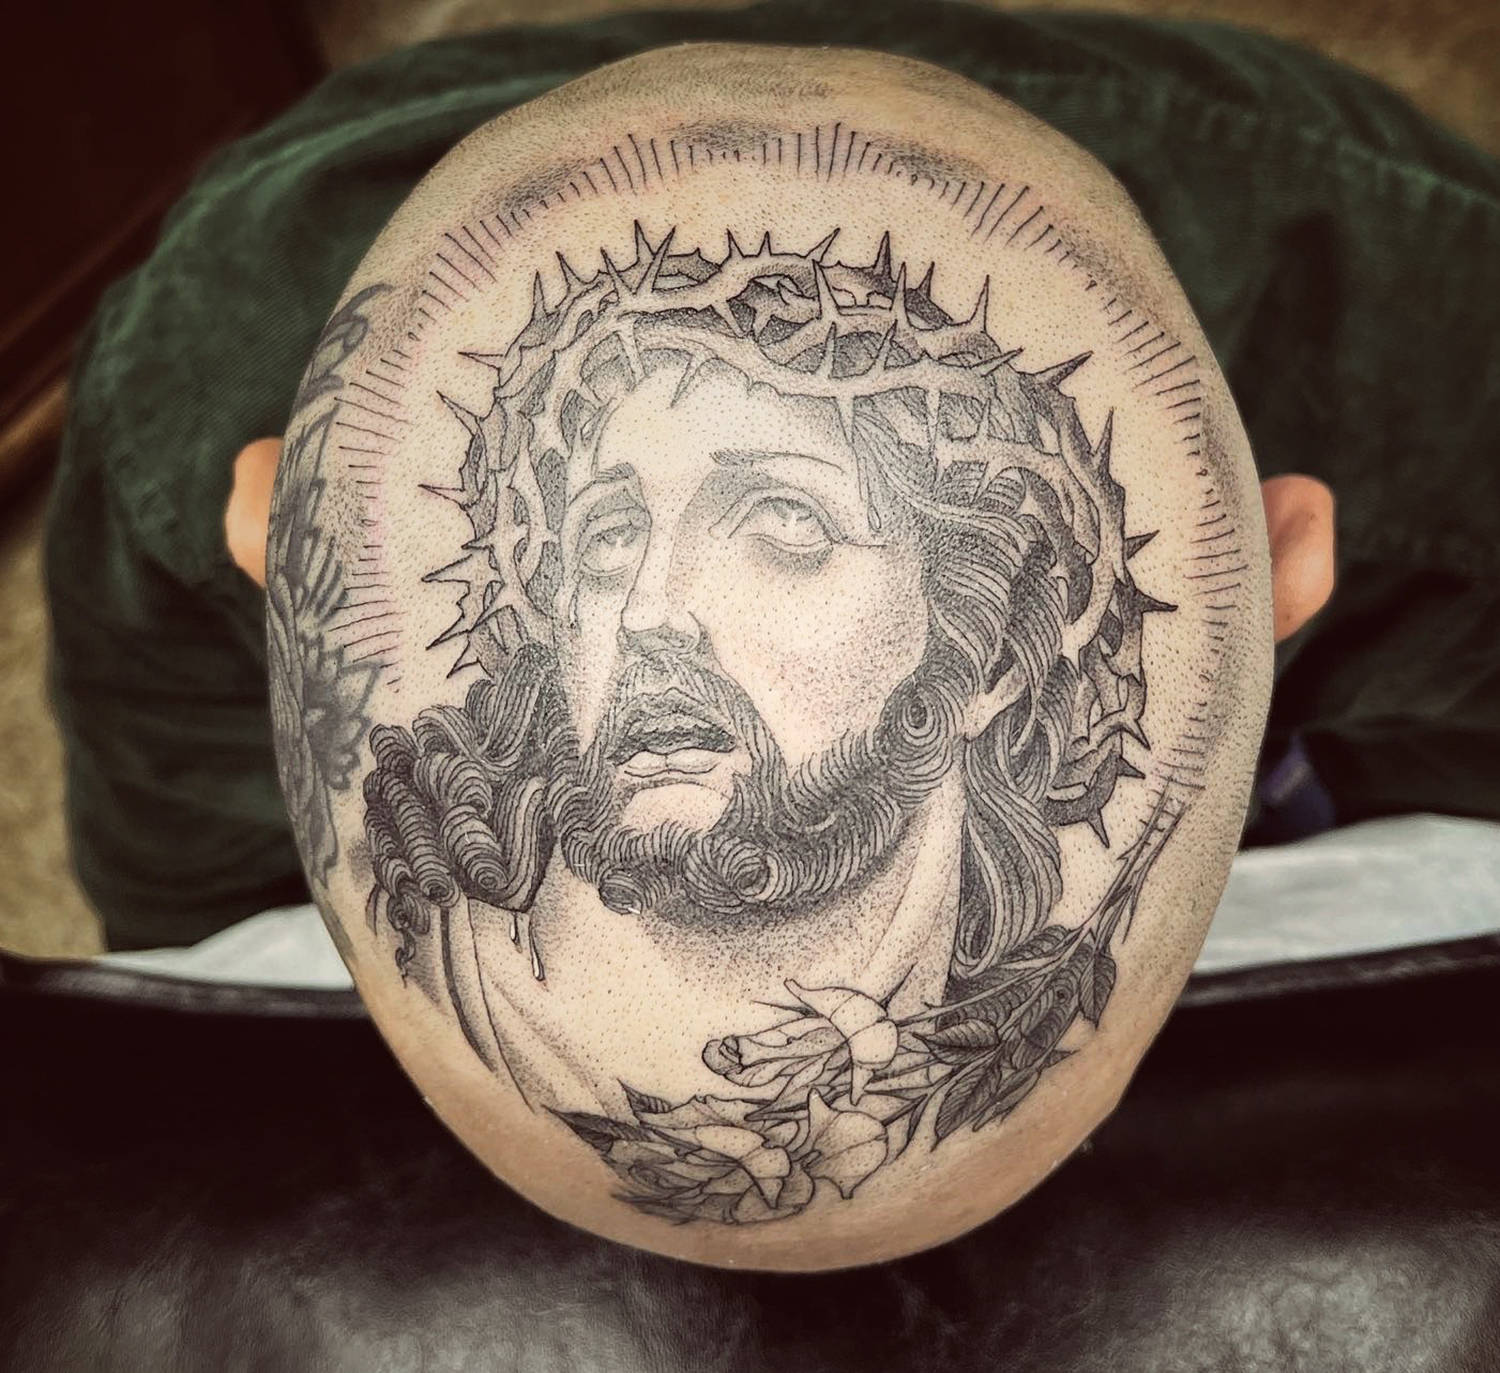 This Christ tattoo is centered and gracefully done with line and dot work